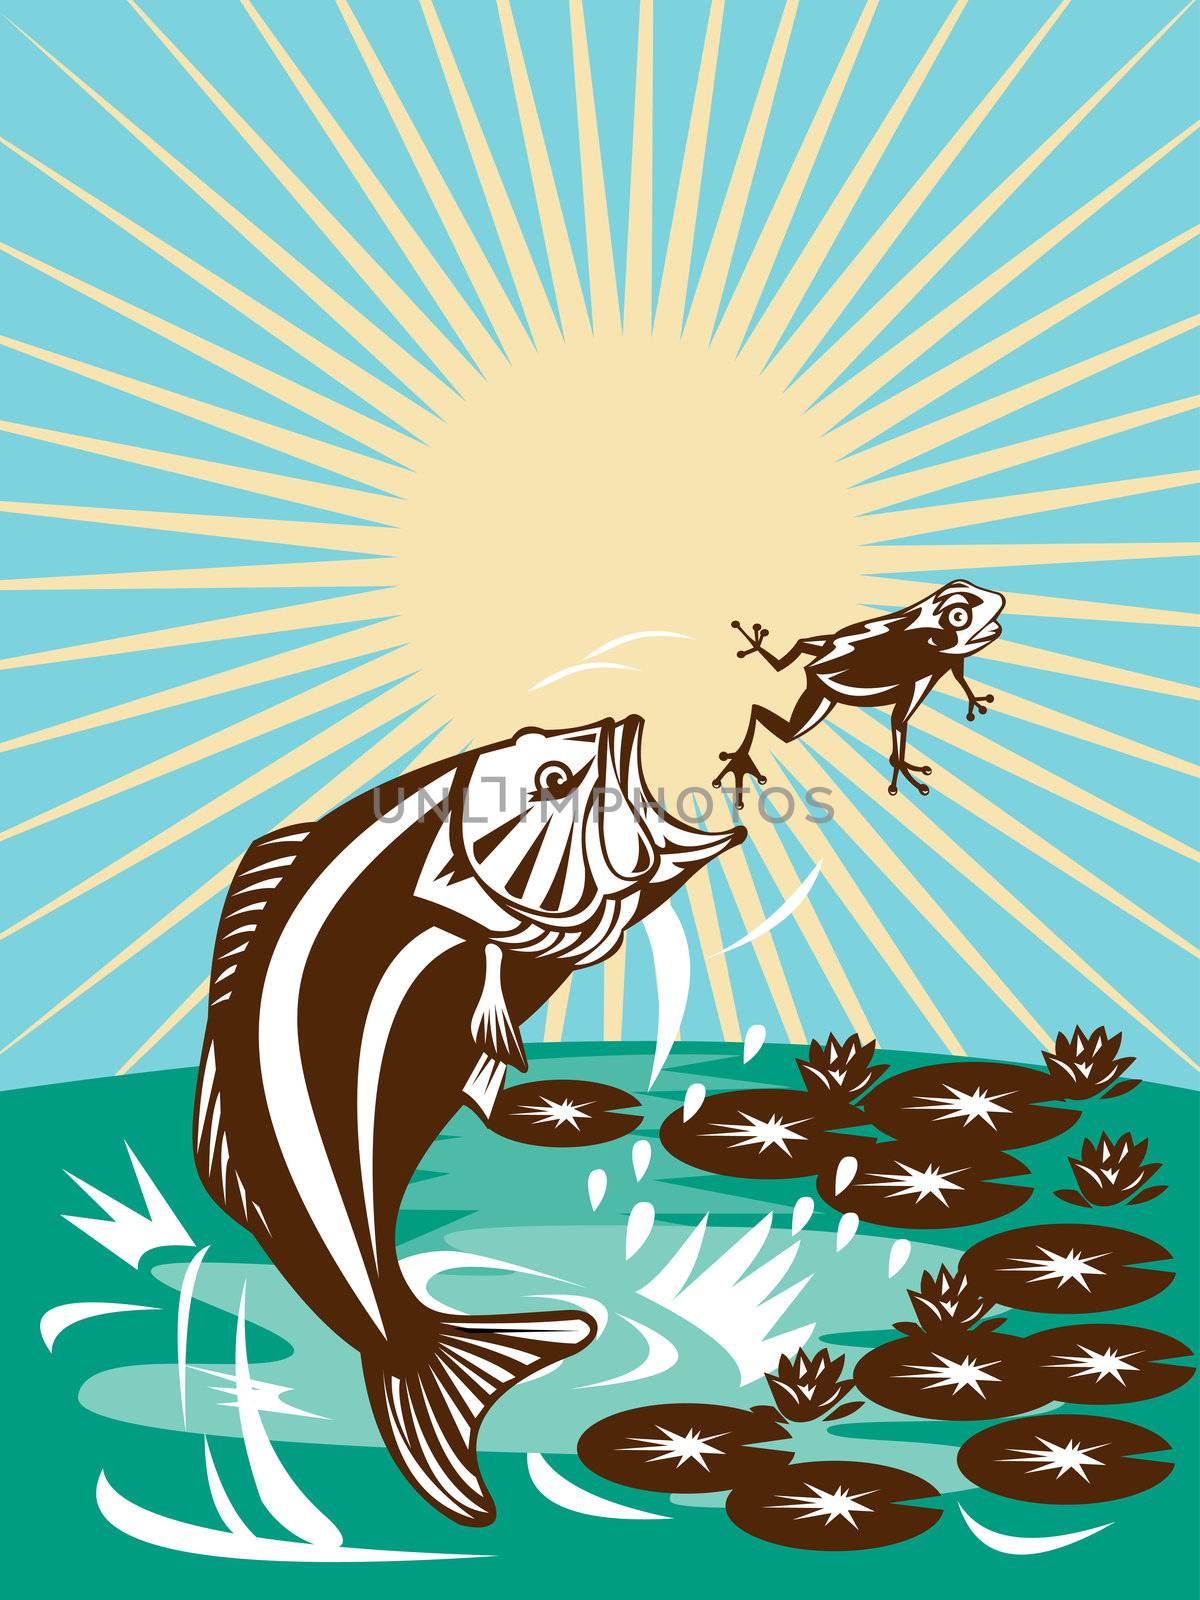 illustration of a largemouth bass jumping catching a frog with lily pad and flower done in retro style